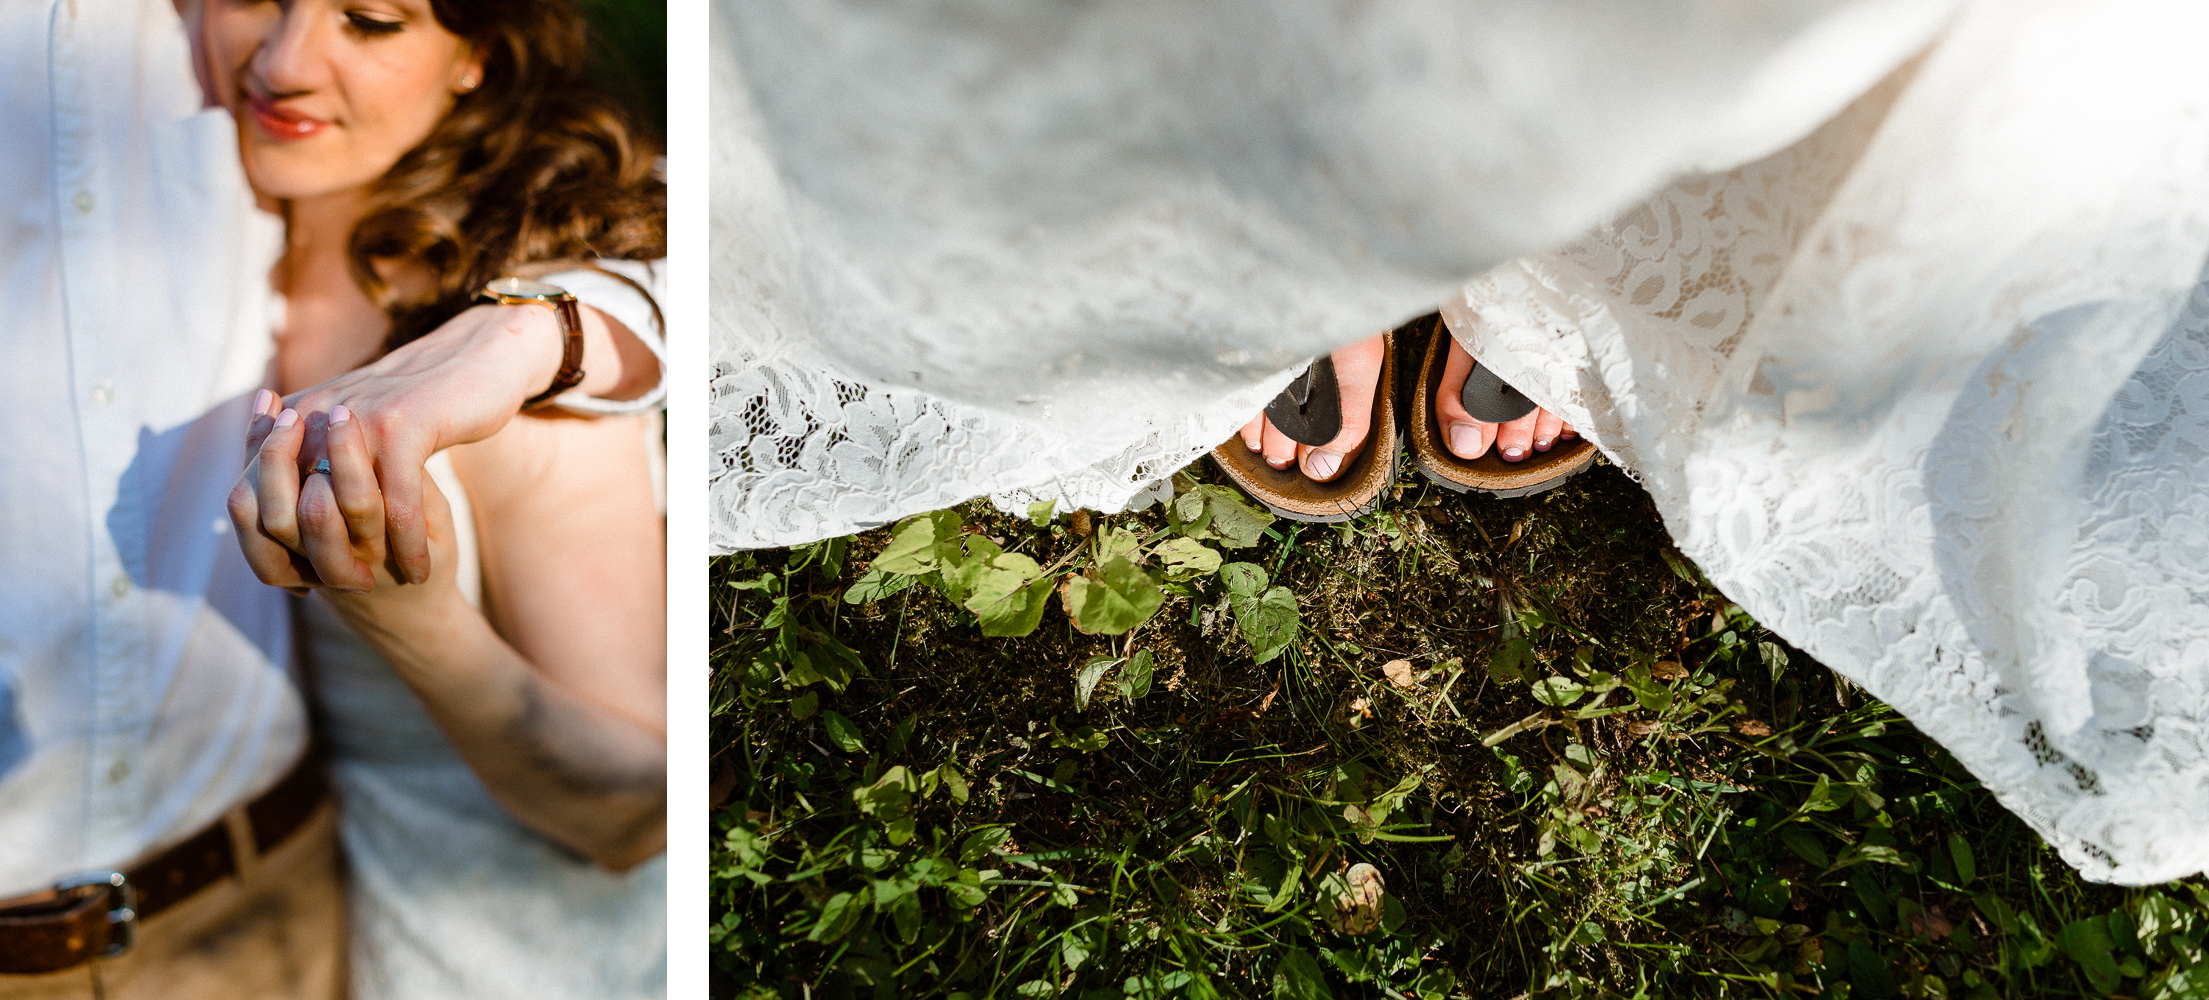 elopement-intimate-wedding-chelsea-quebec-airbnb-ideas-guides-toronto-elopement-photographer-90.PNG